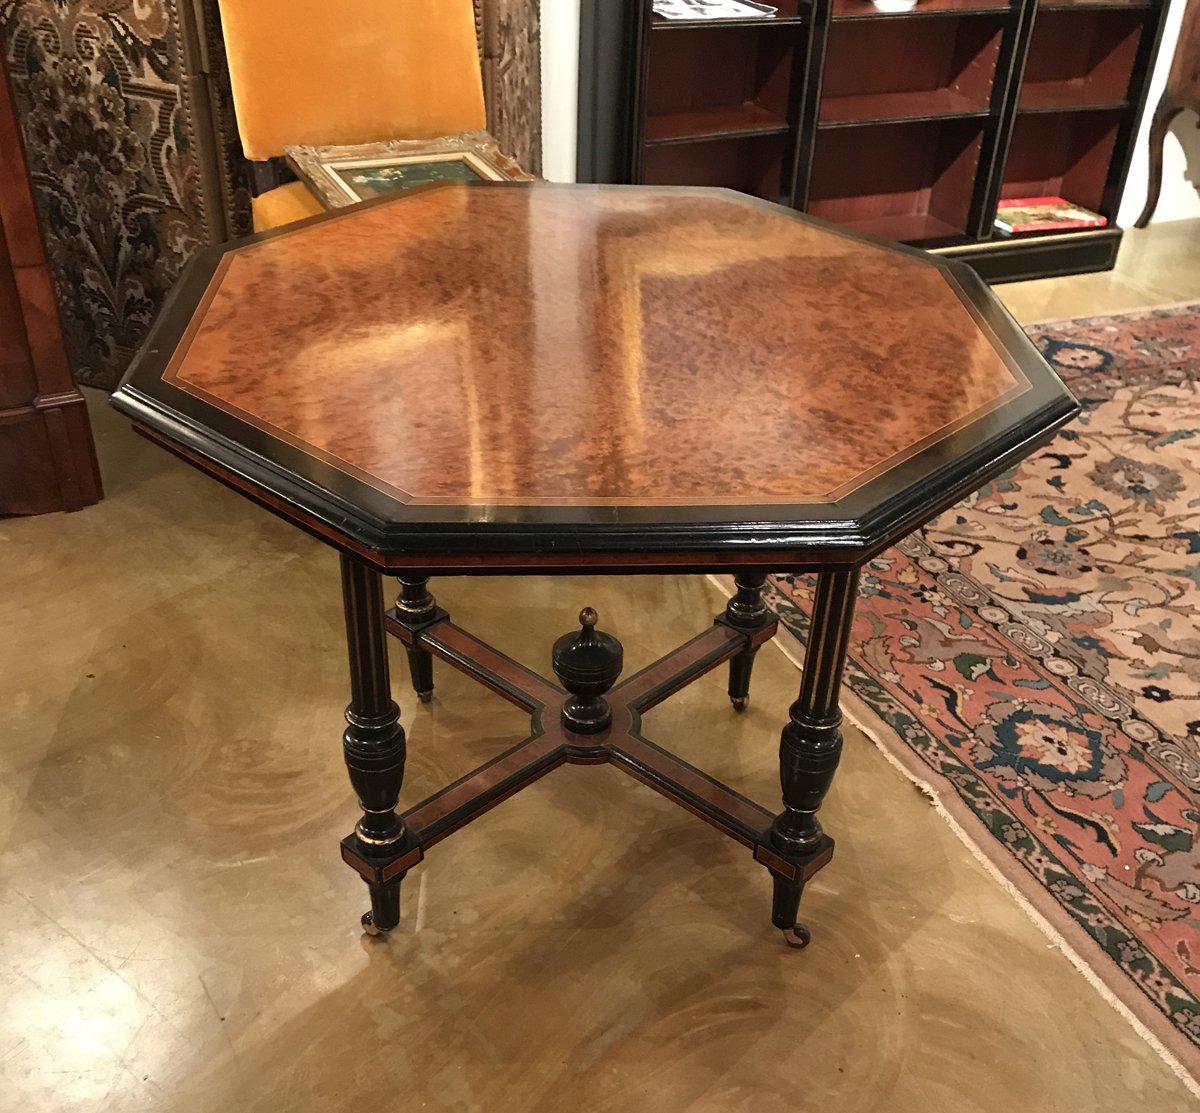 tables trianon antiques table square accent game aesthetic movement ebonized octagonal rare amboya wood satinwood parcel gilt farmhouse dining room height living sets black